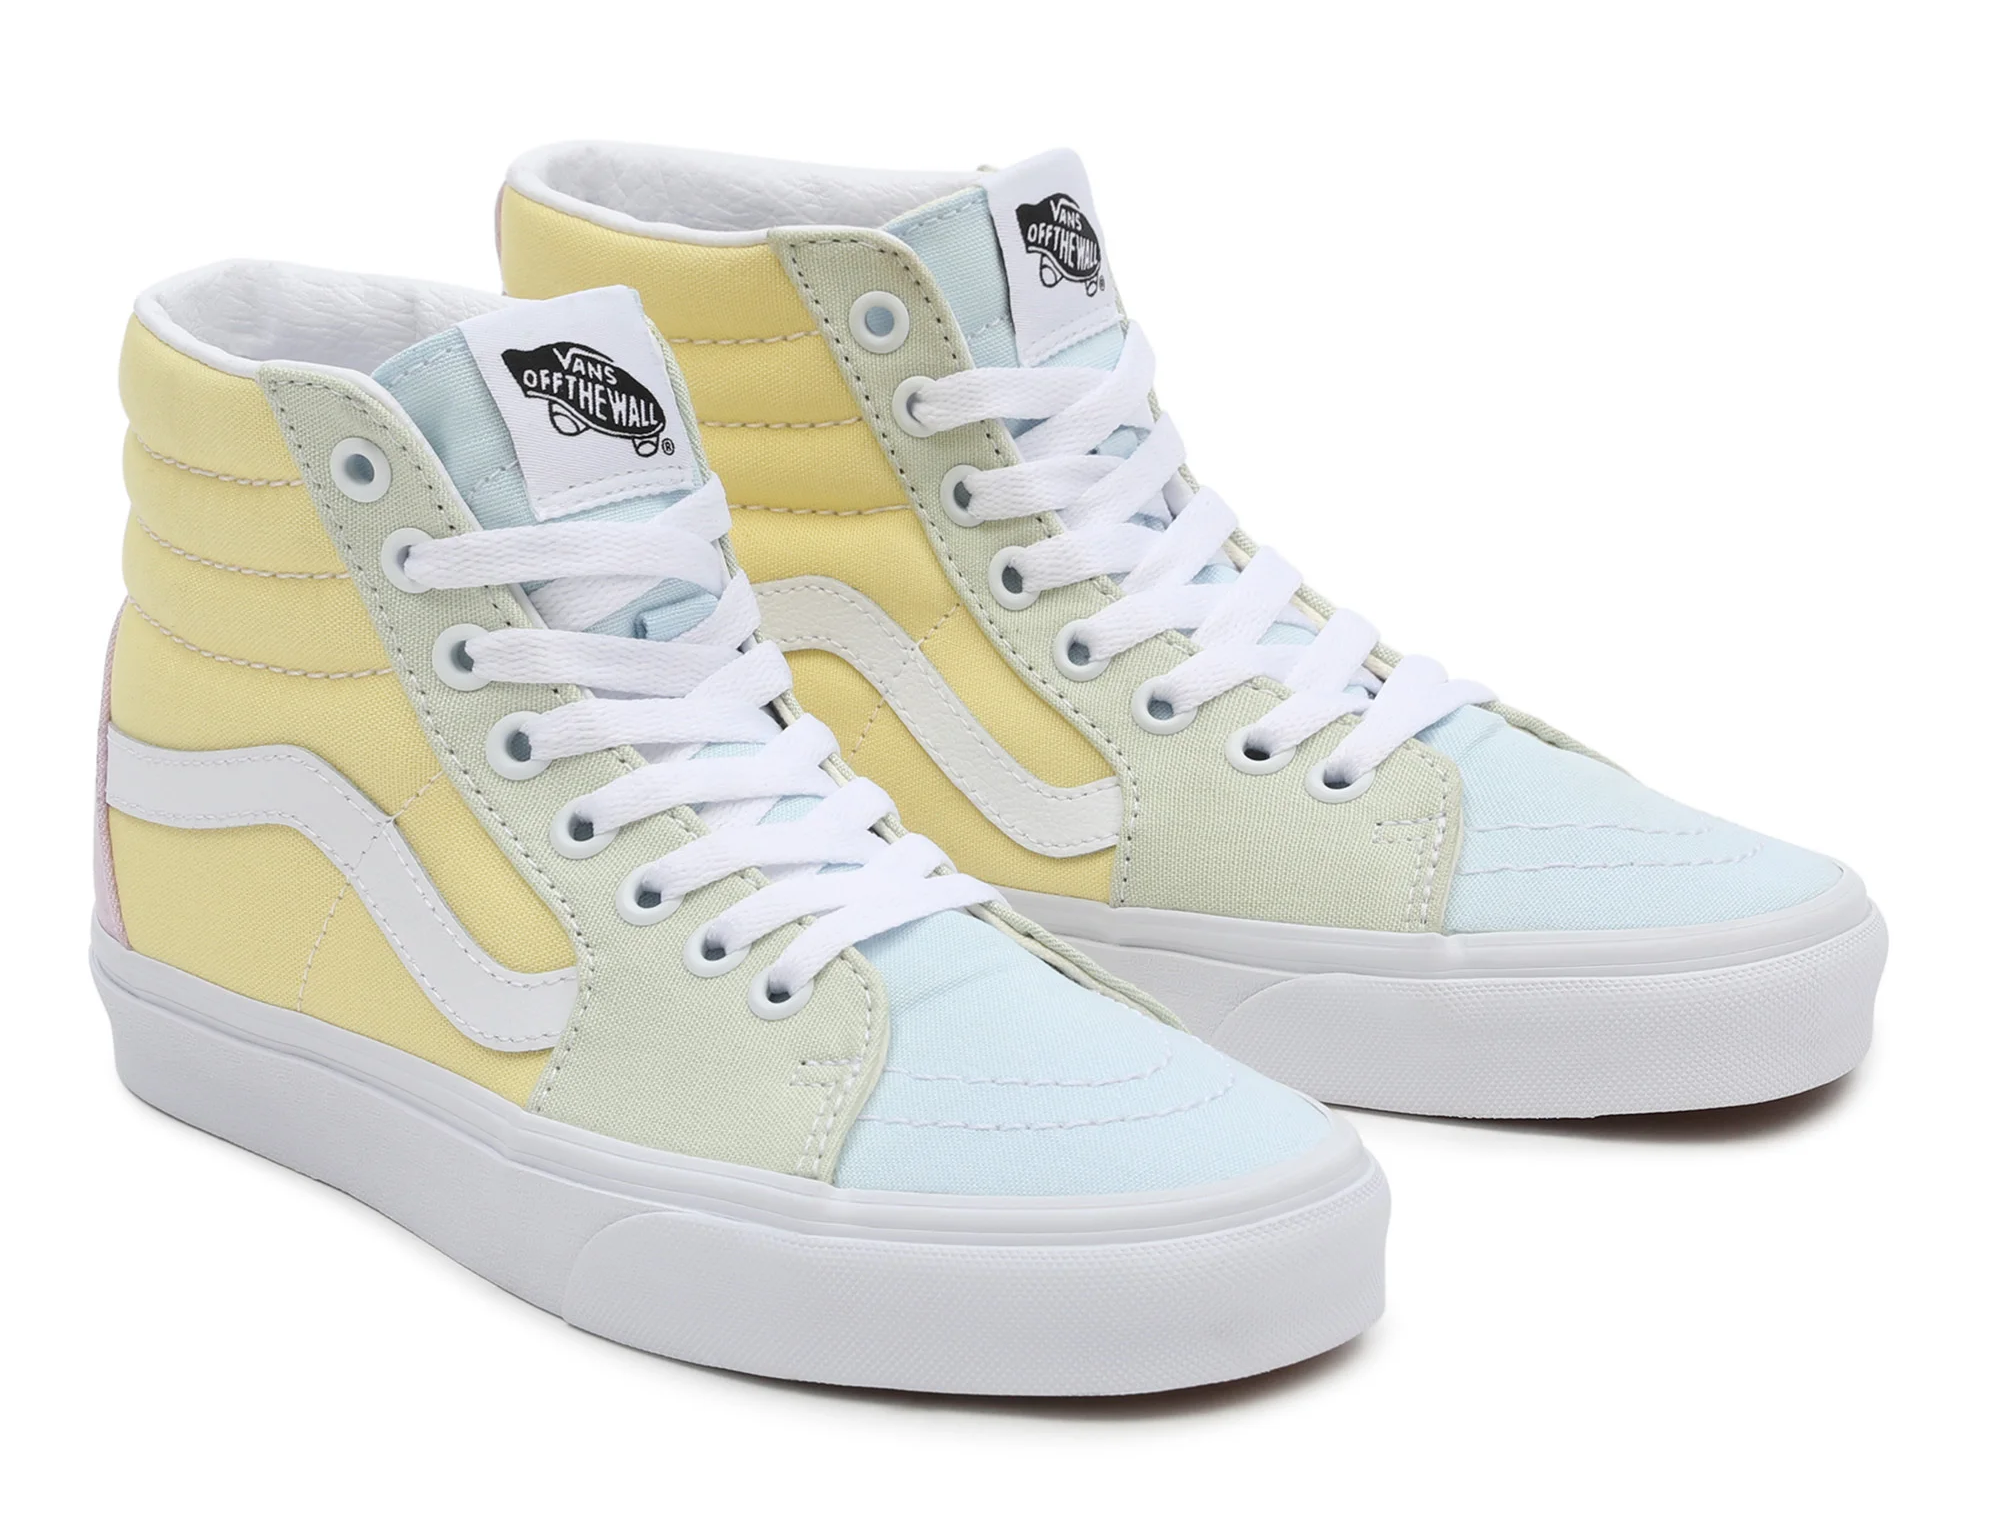 UhfmrShops - VN0A5JMIBLG | vans comfycush old skool womens shoes trainers  in yellow 'Varsity Canvas - Green' - vans x spitfire pack chukka lowera pro